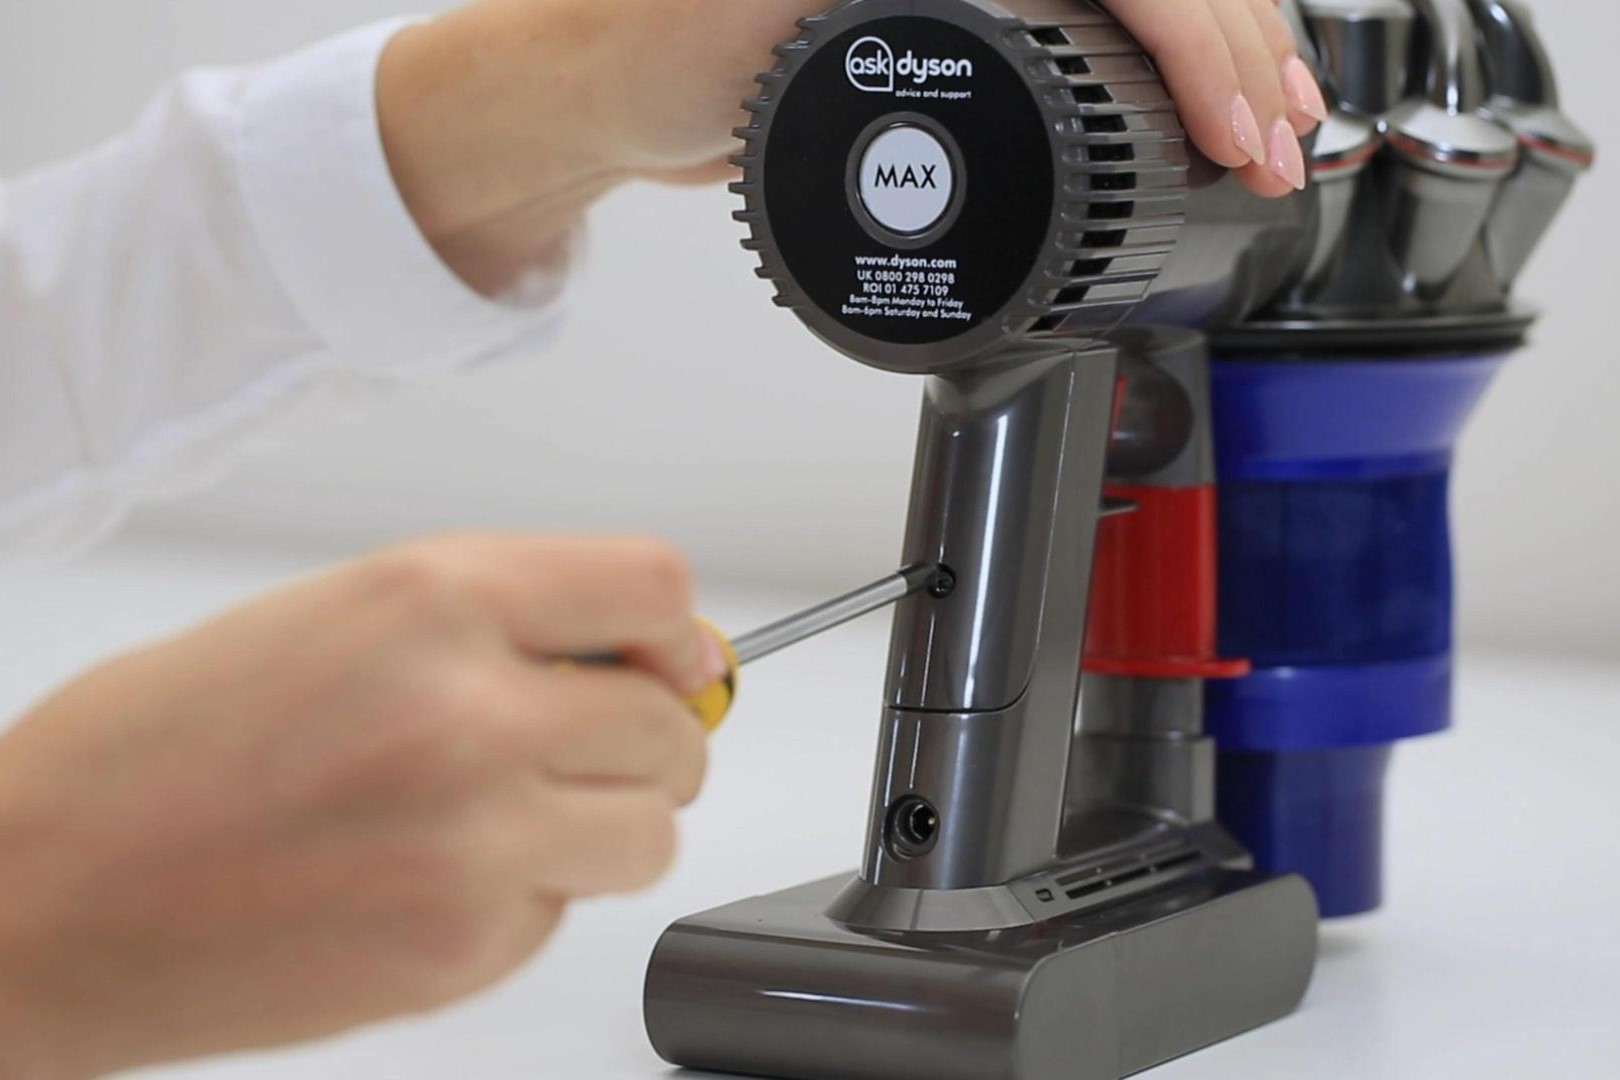 Dyson Battery Replacement: Step-by-Step DIY Guide